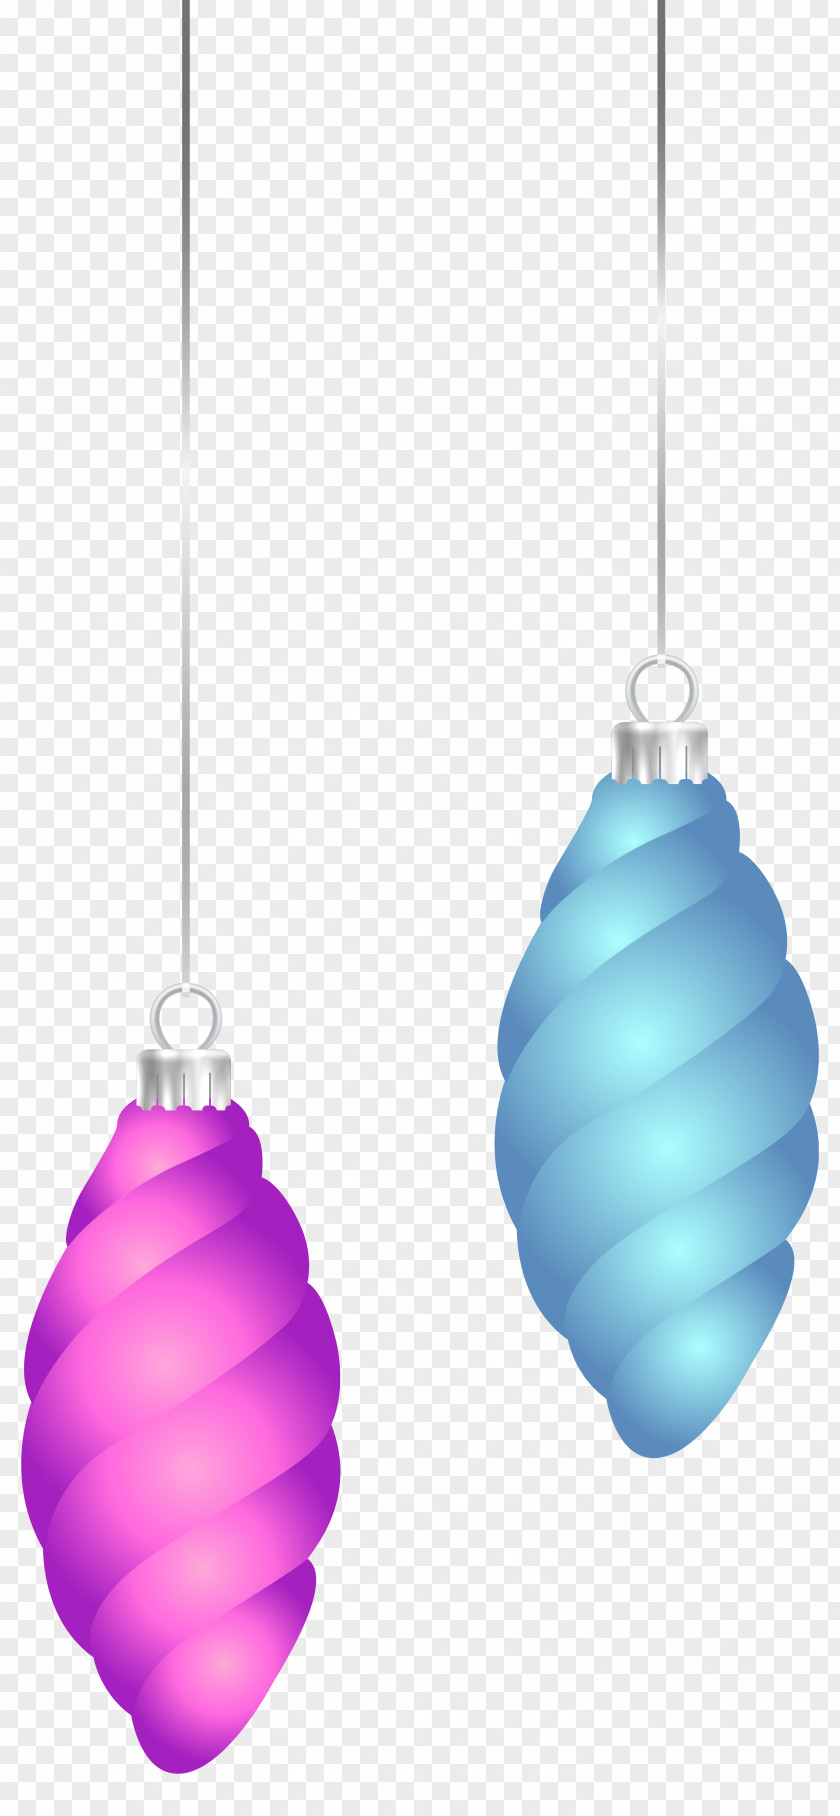 Ornaments Clipart Christmas Ornament Decoration Lighting PNG